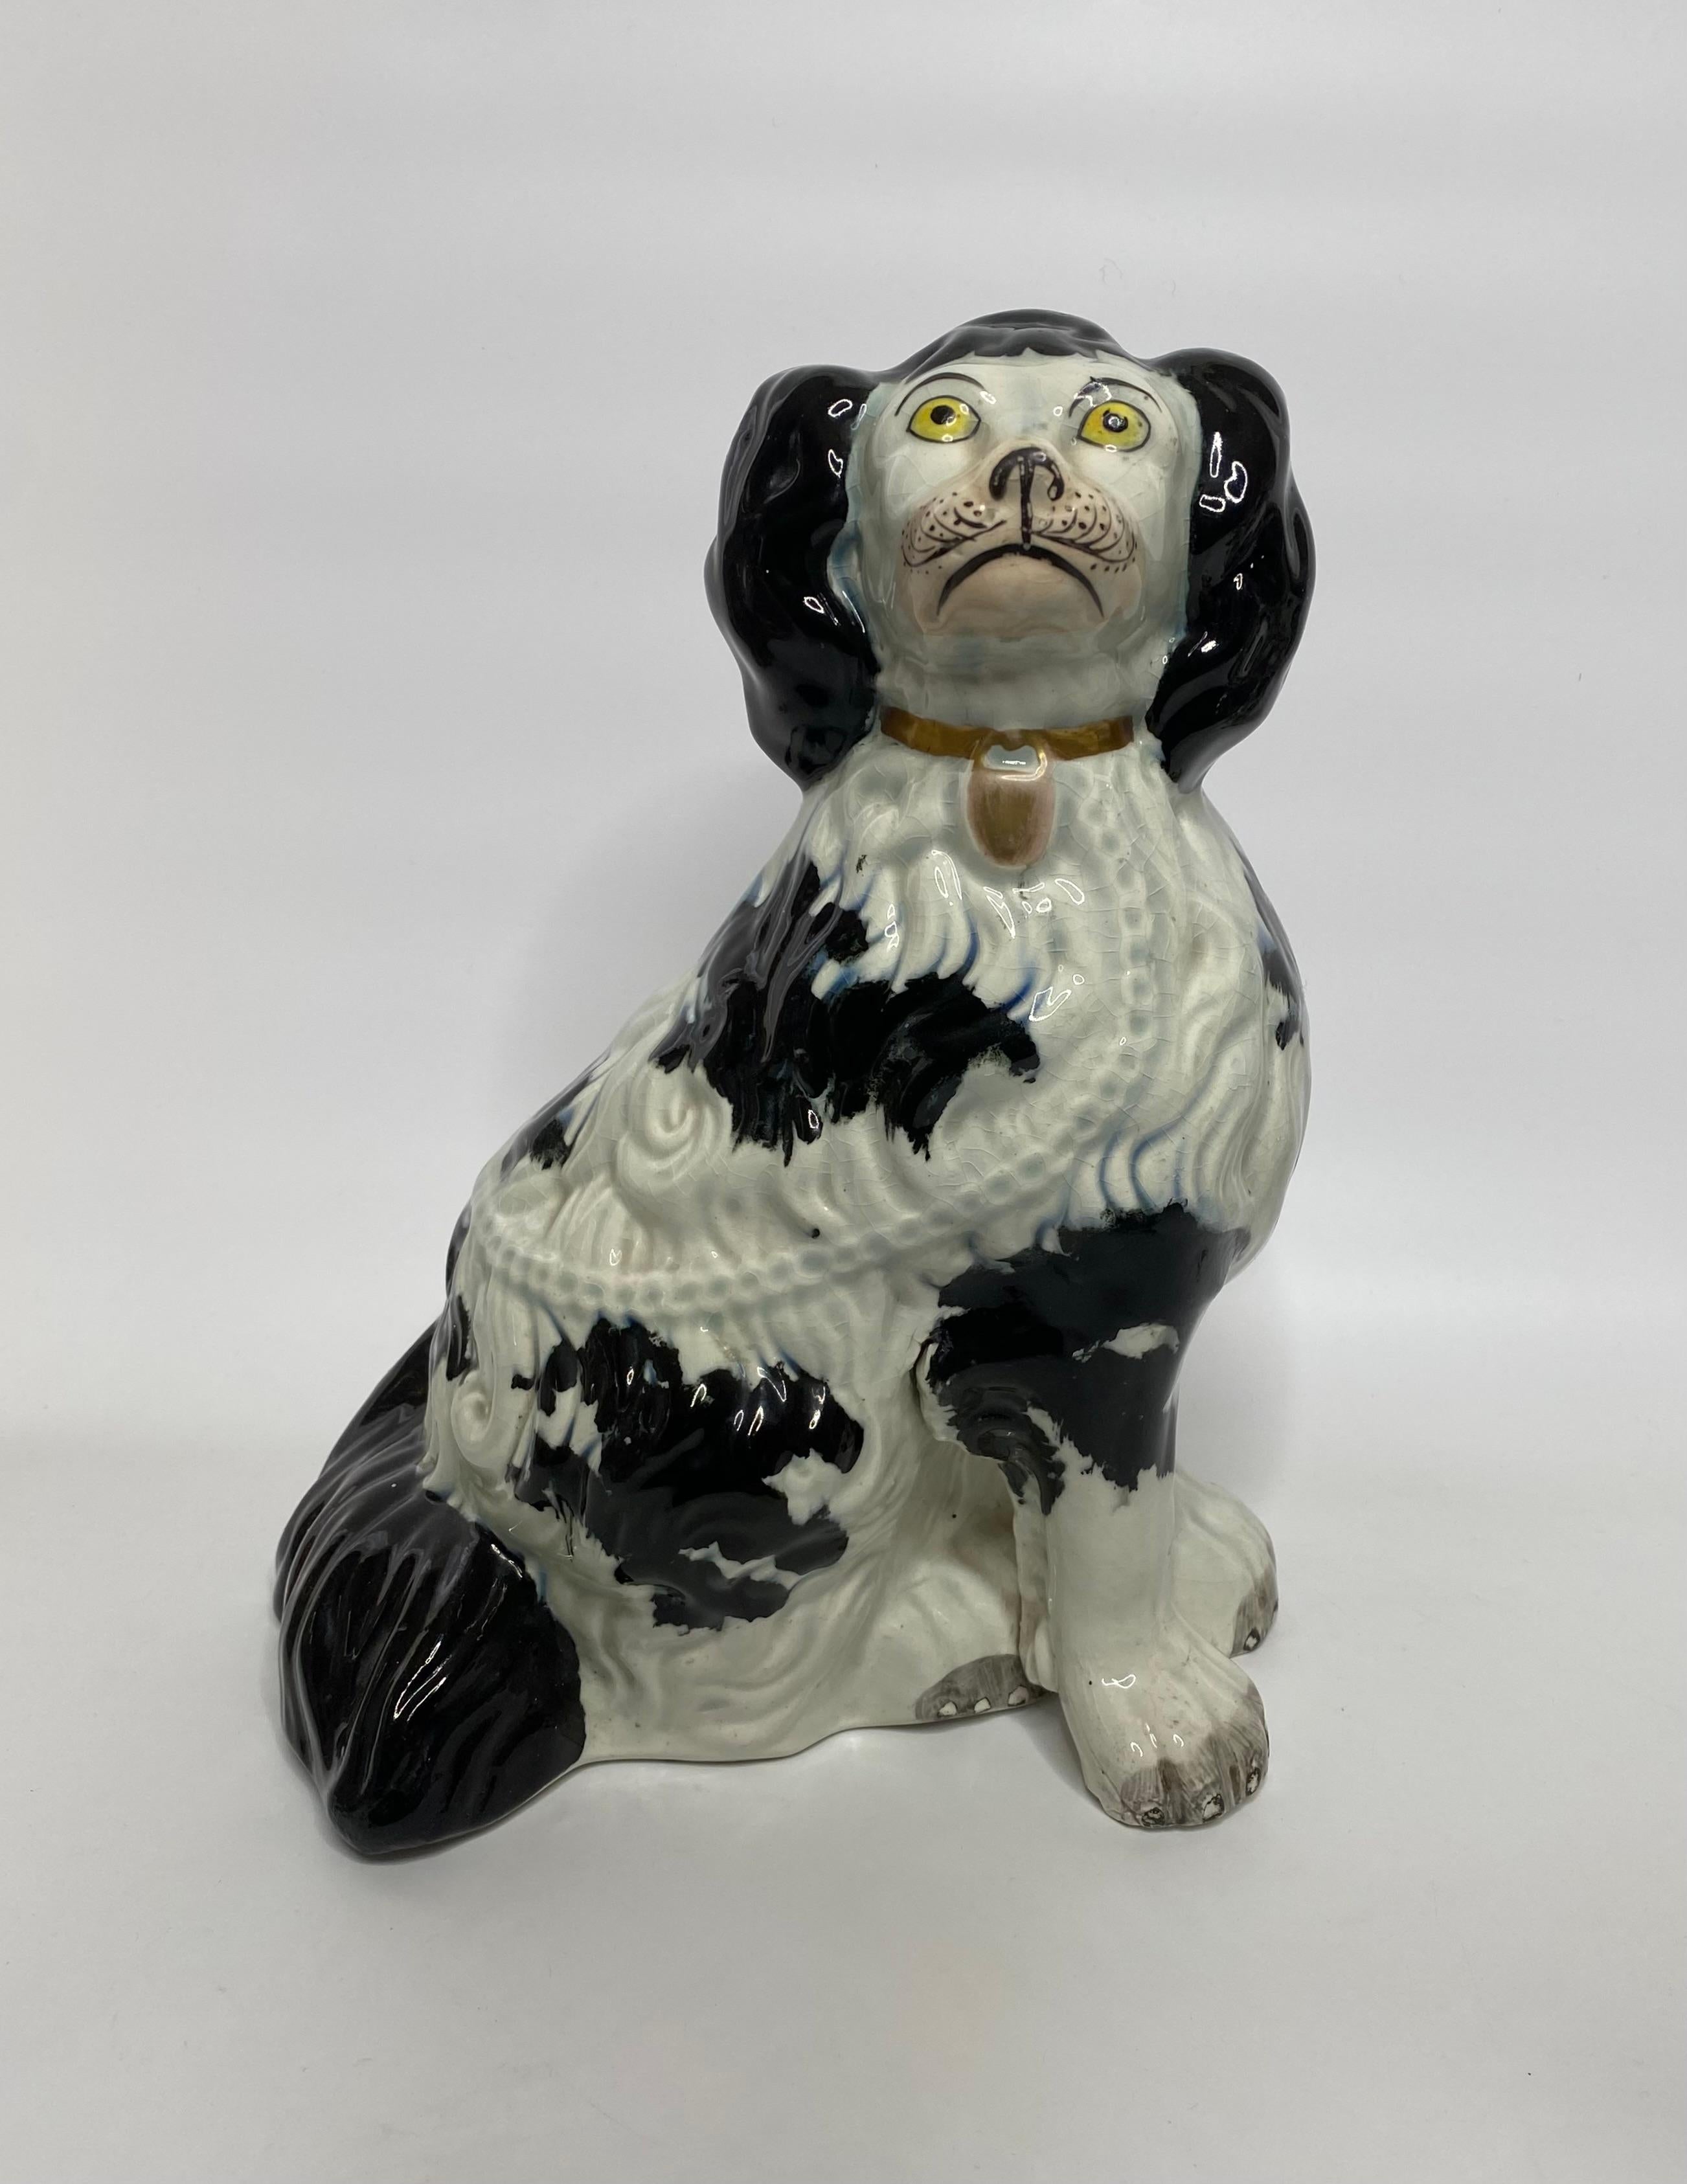 A fine, large pair of Staffordshire pottery Spaniels, c.1840. Both seated dogs, with separate front legs, and broad backsides. Finely moulded hair, and painted with underglaze black spots. Having yellow eyes, grey paws, pink muzzles, and wearing